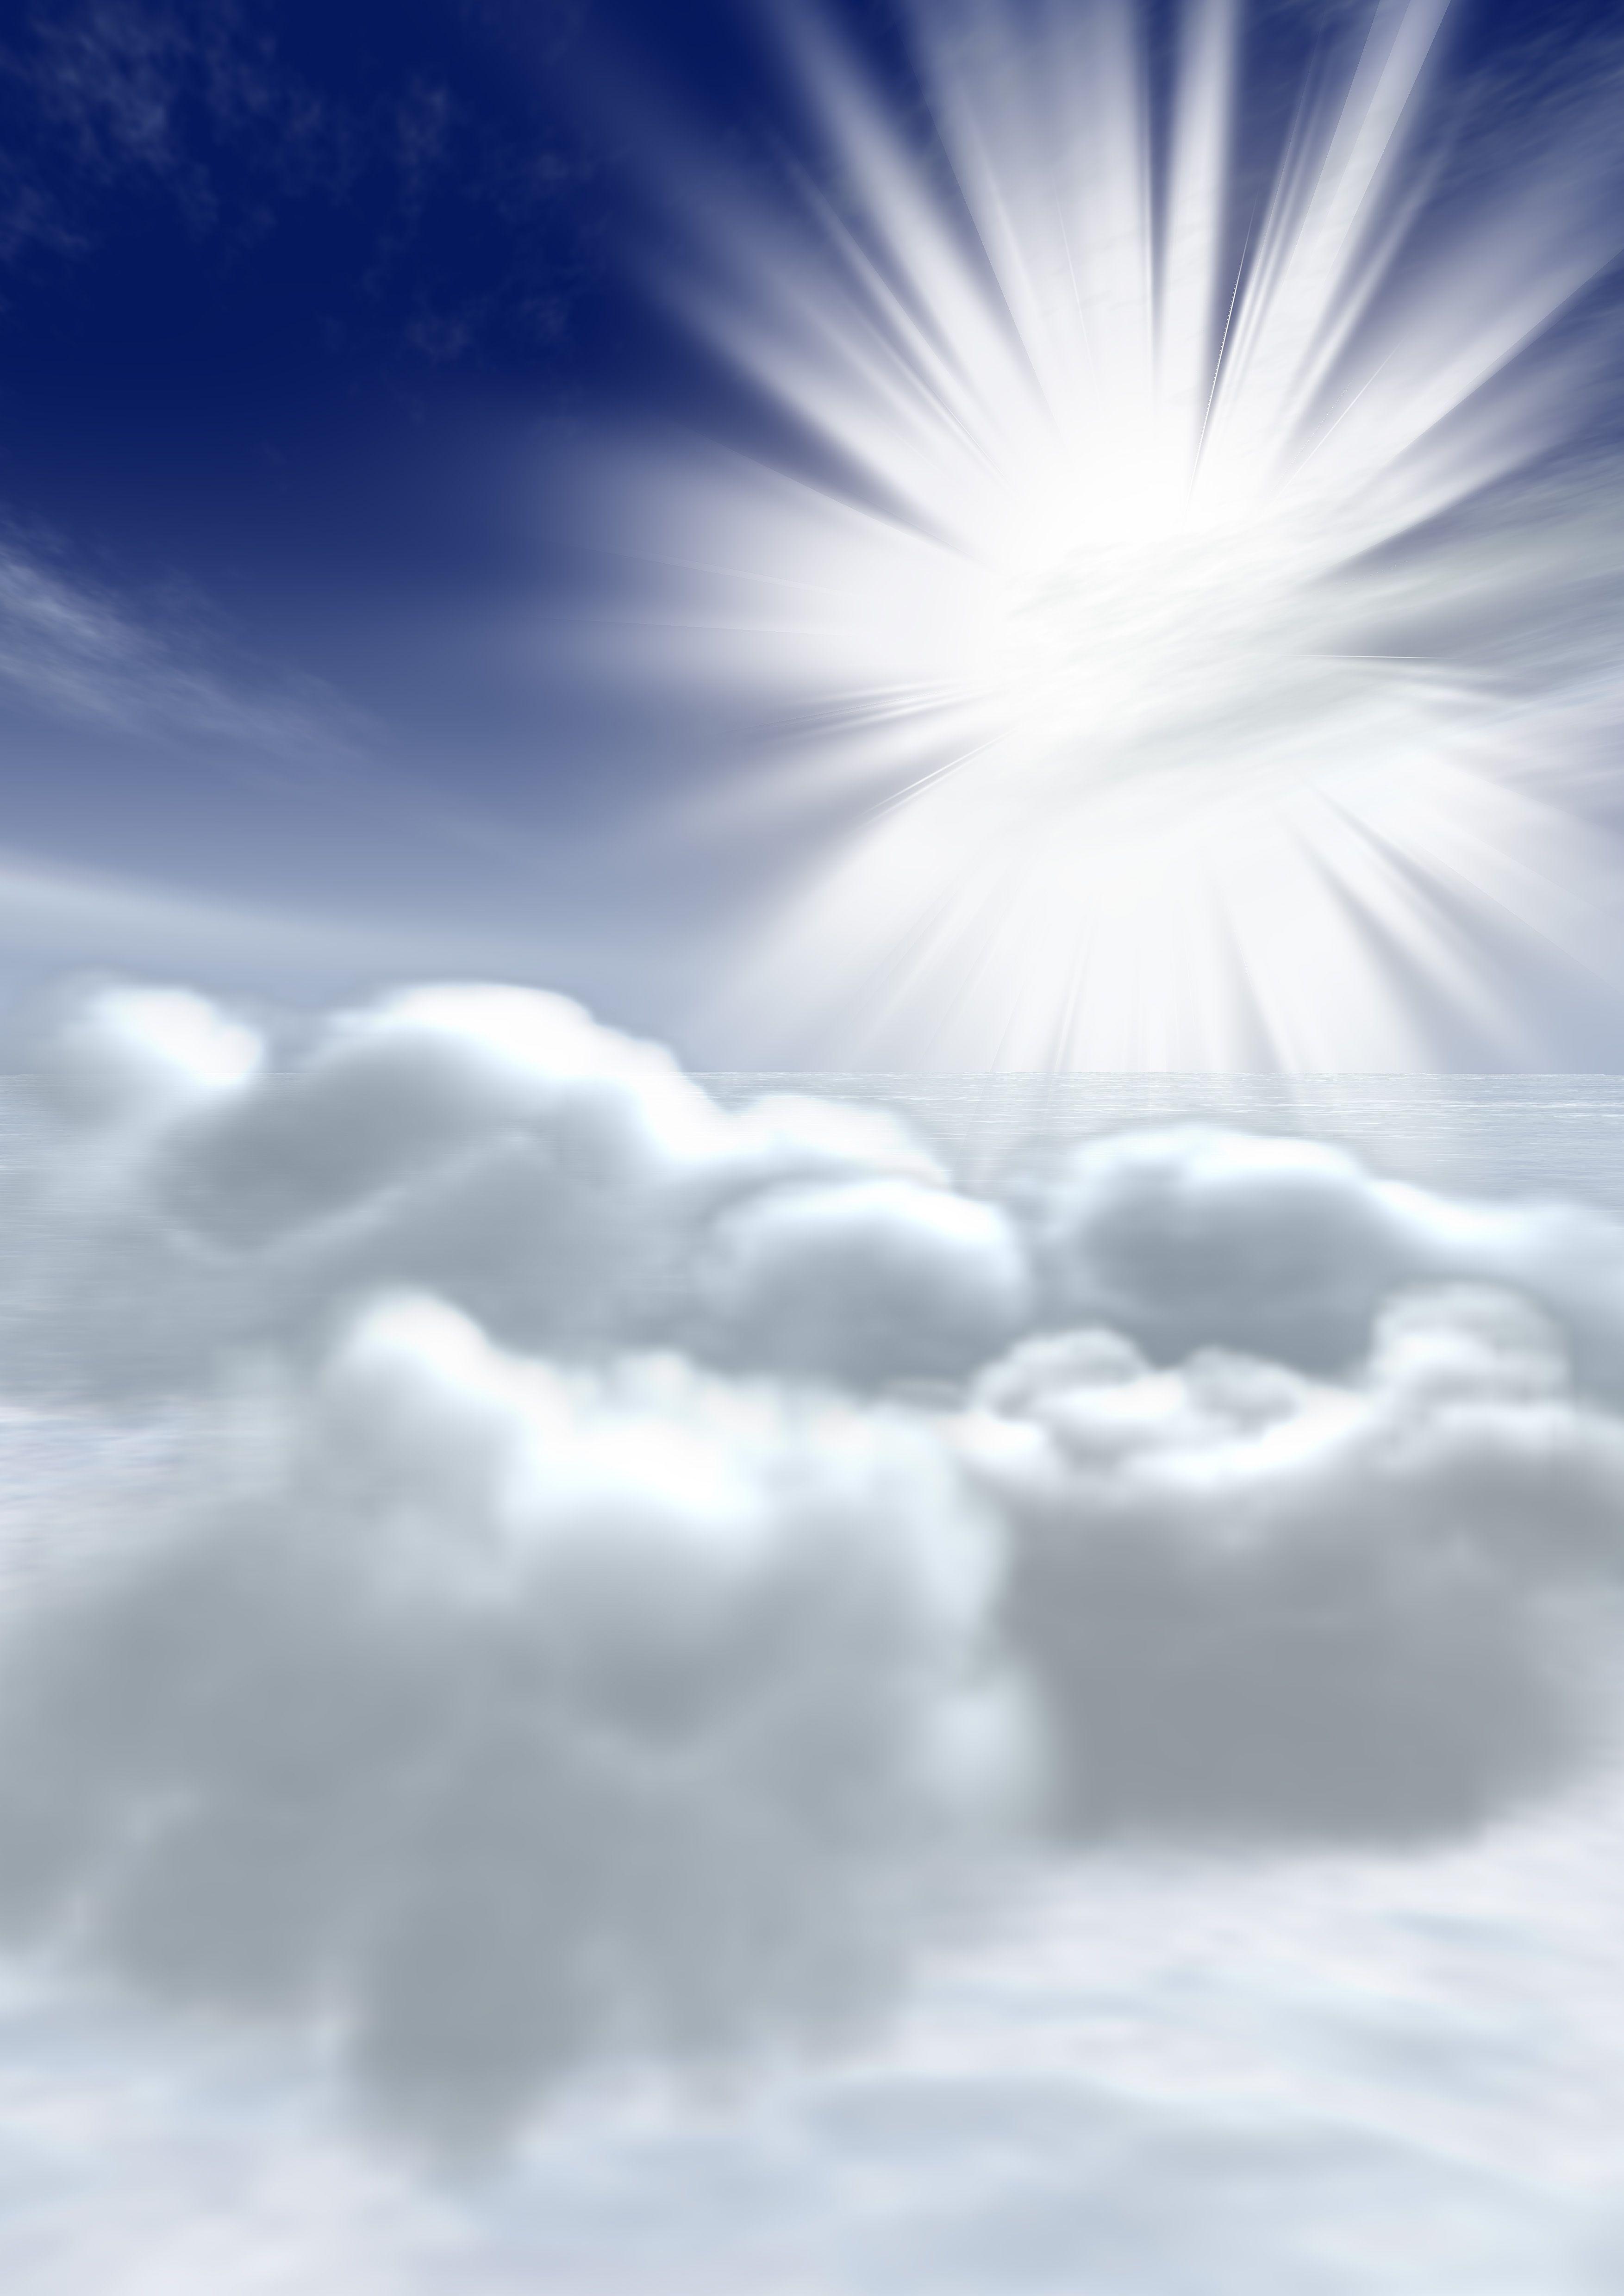 Free funeral backgrounds for programs. Funeral Programs